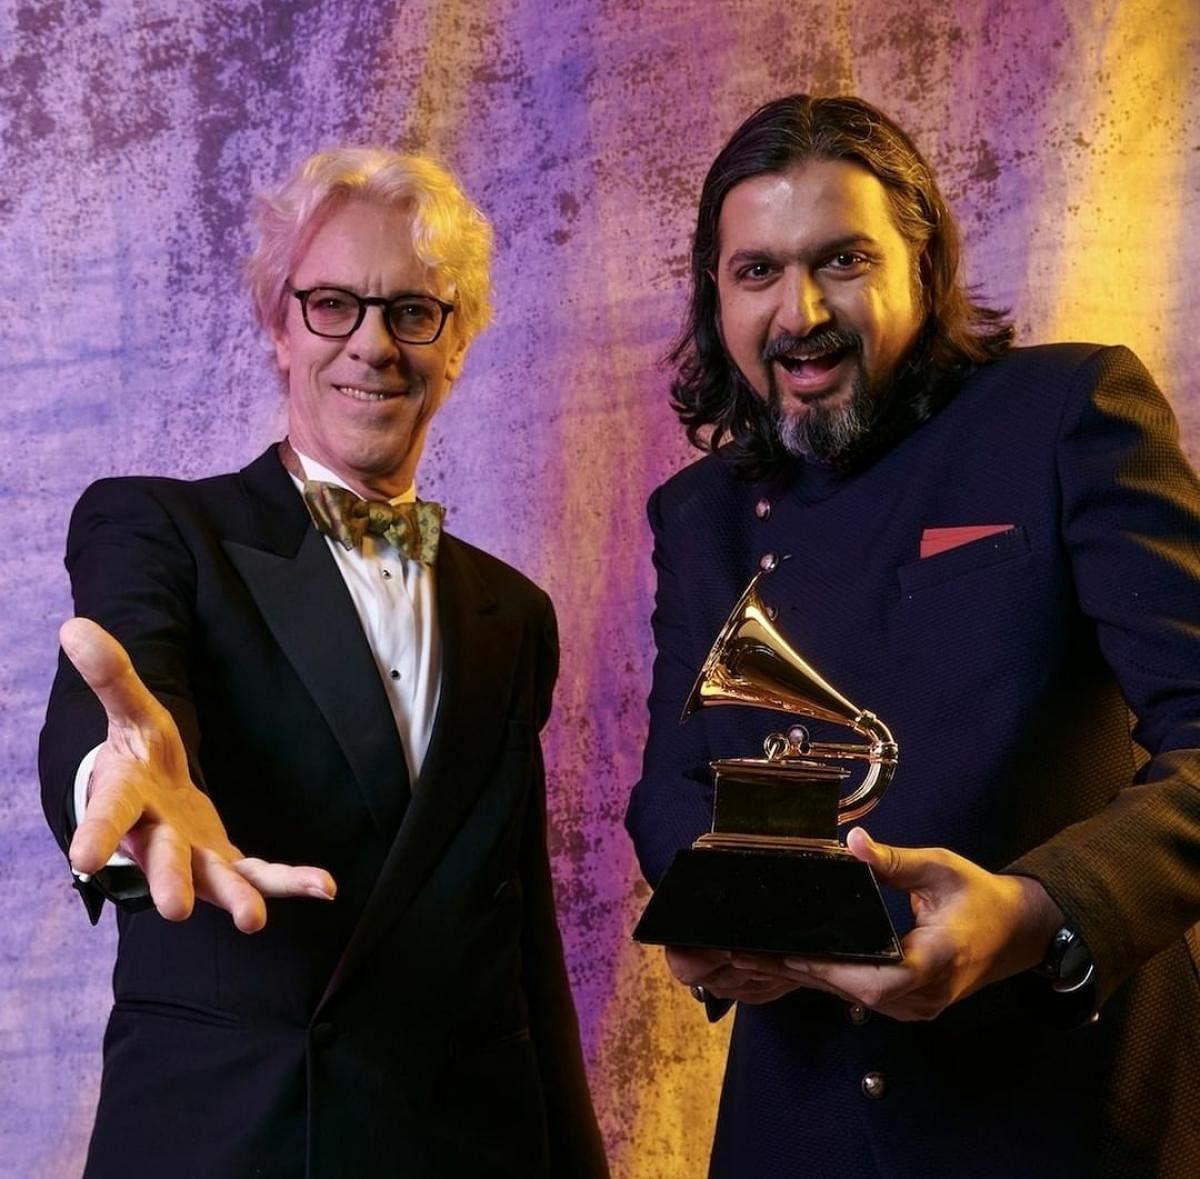 Ricky Kej (right) with Stewart Copeland after winning the Grammy for the album ‘Divine Tides’ in the Best New Age category earlier this month. 